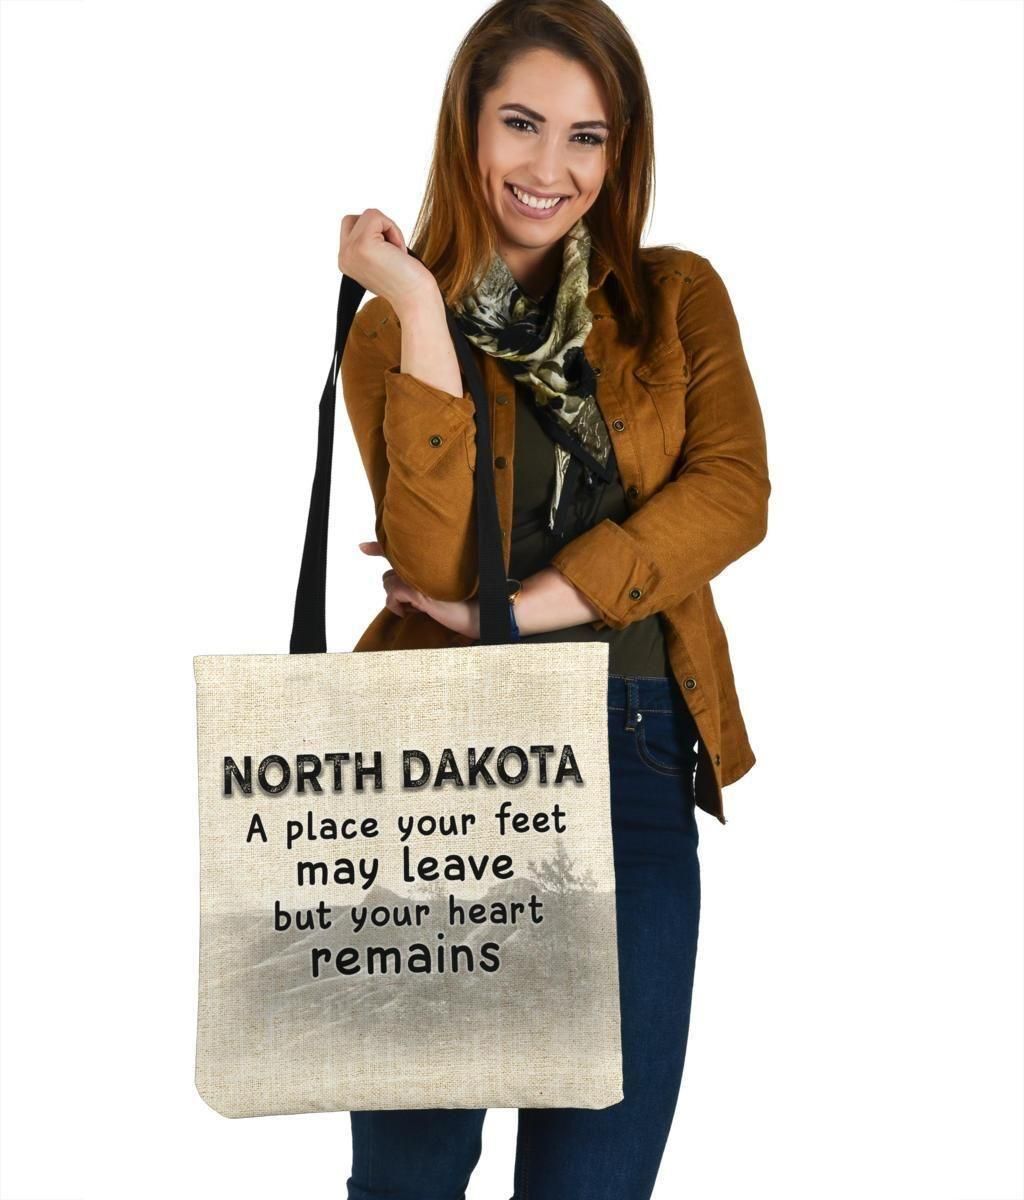 North Dakota A Place Your Feet Leave Your Heart Remains Tote Bag